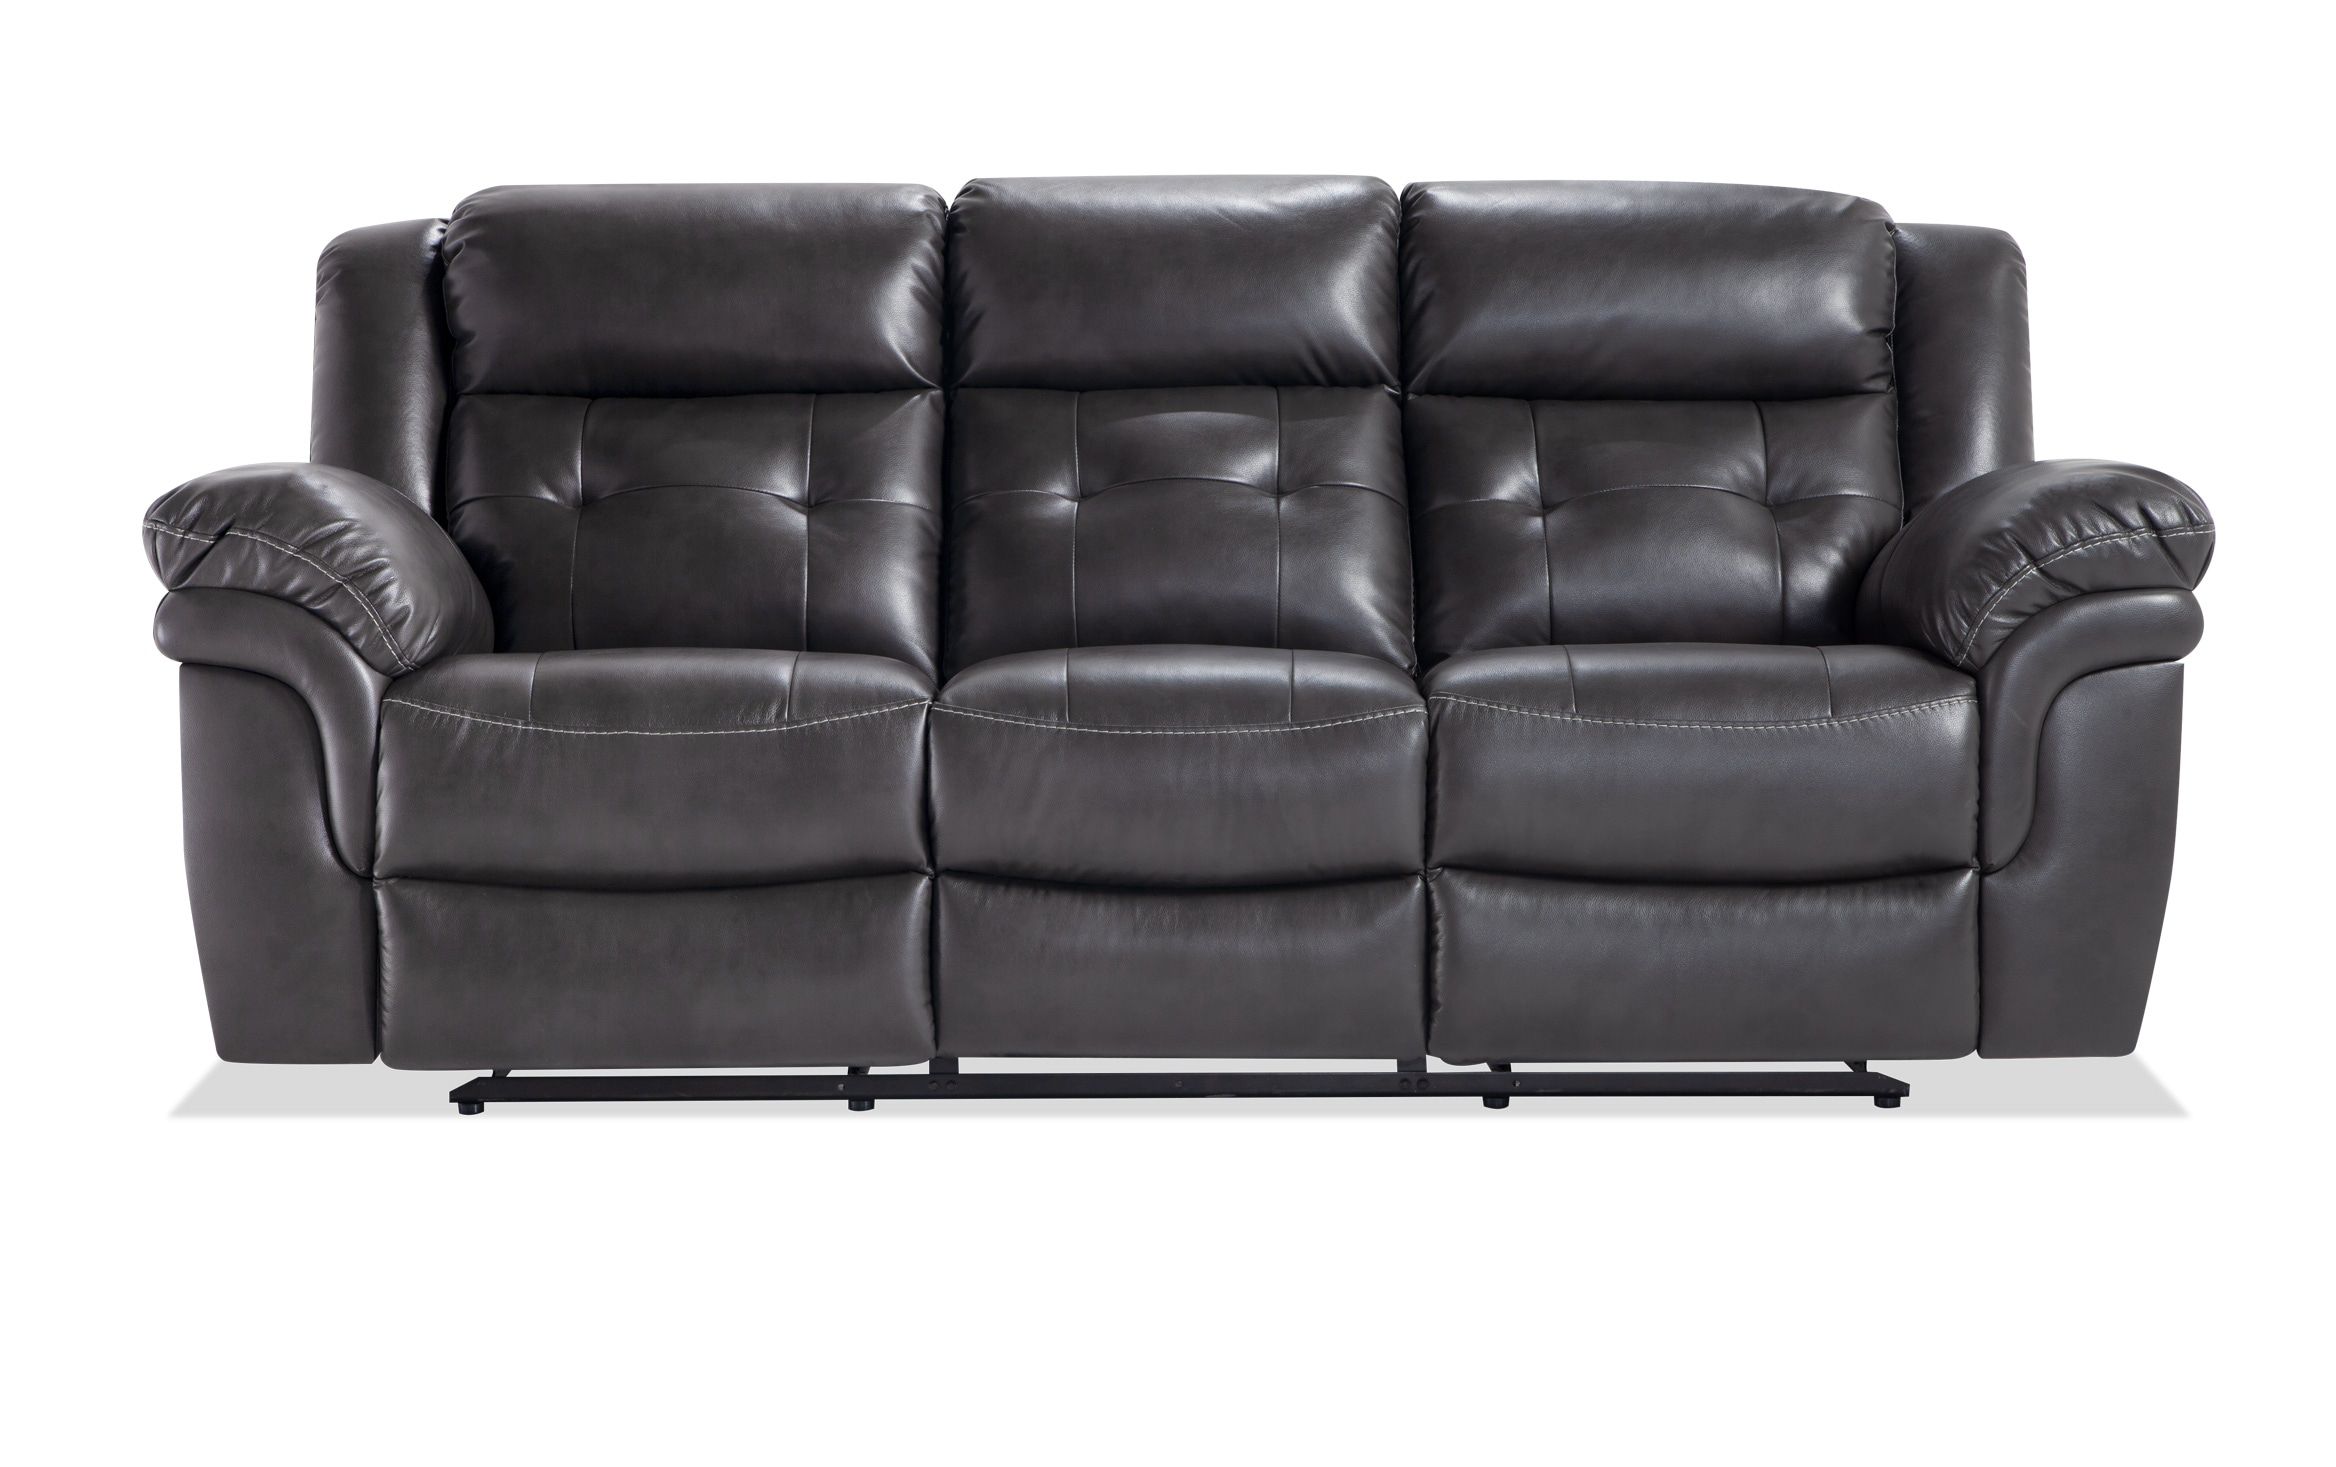 [Download 25+] Bobs Furniture Leather Living Room Sets With Regard To Panther Black Leather Dual Power Reclining Sofas (View 1 of 15)